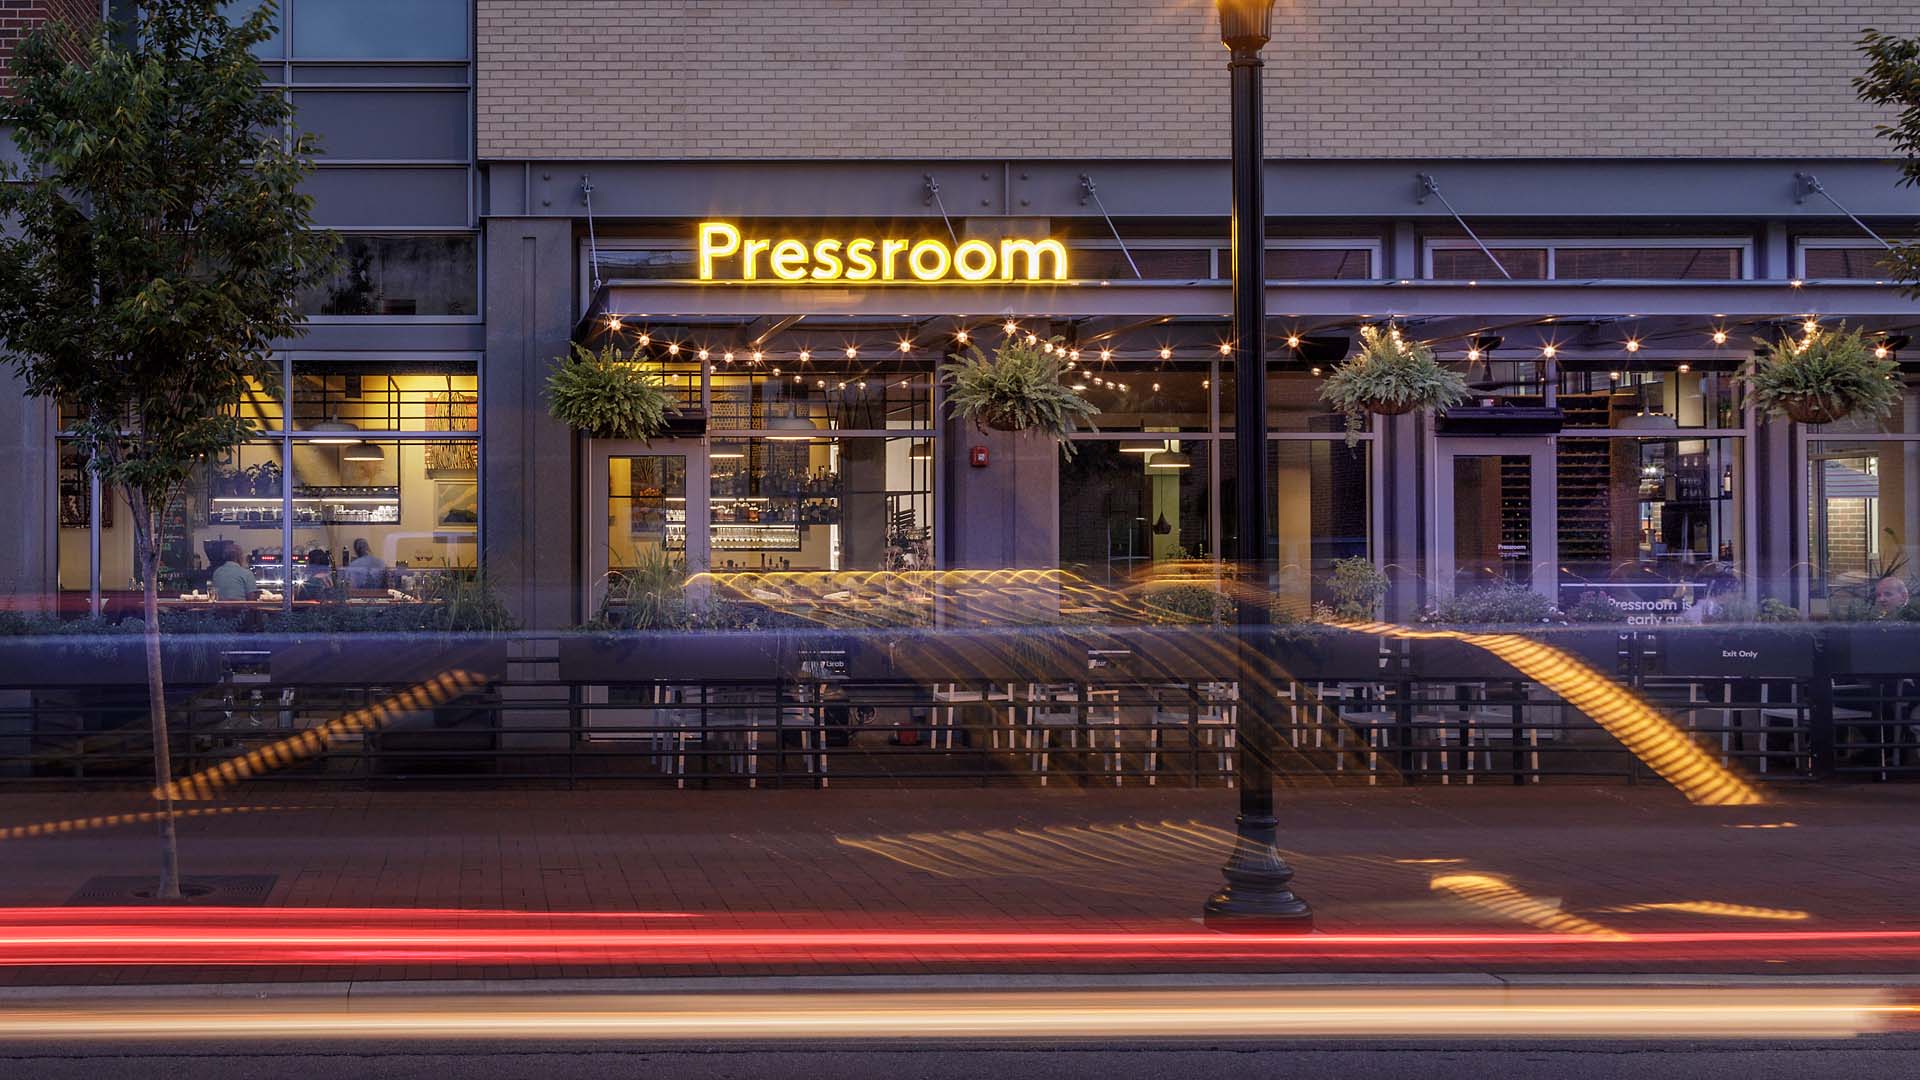 Pressroom patio at dusk with a long exposure light trail.